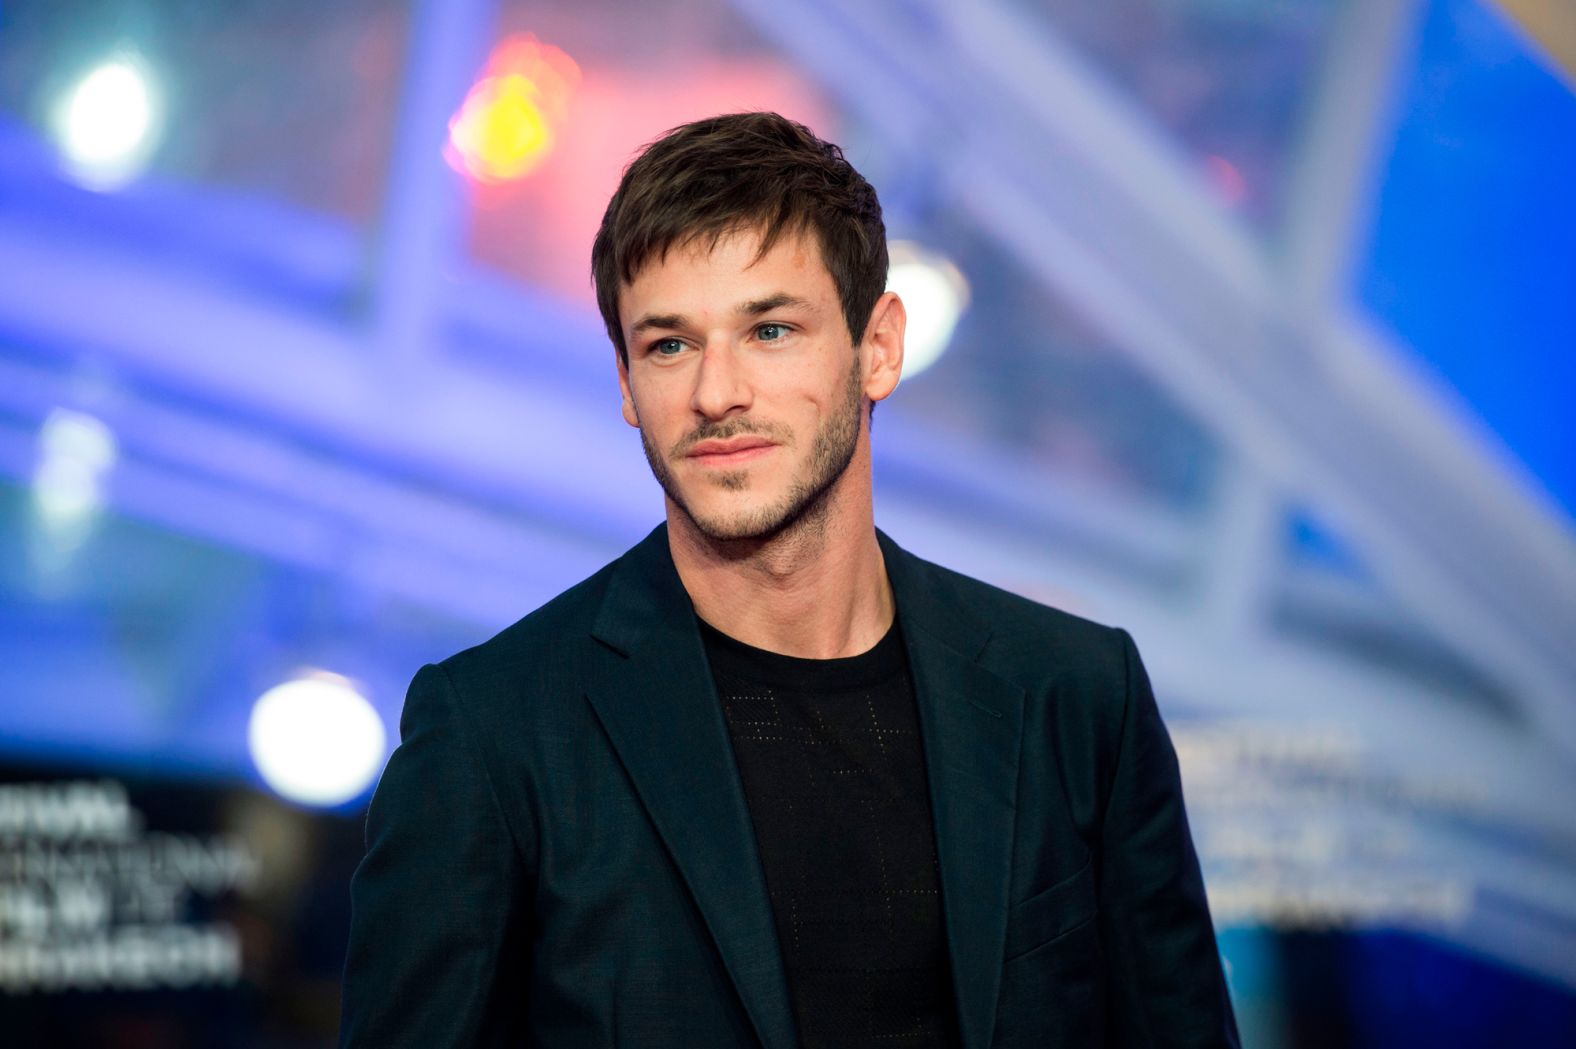 French actor <a href="index.php?page=&url=https%3A%2F%2Fwww.cnn.com%2F2022%2F01%2F19%2Fentertainment%2Fgaspard-ulliel-death-ski-accident-scli-intl%2Findex.html" target="_blank">Gaspard Ulliel,</a> best known for playing Hannibal Lecter in "Hannibal Rising," died after a skiing accident on January 18. He was 37.